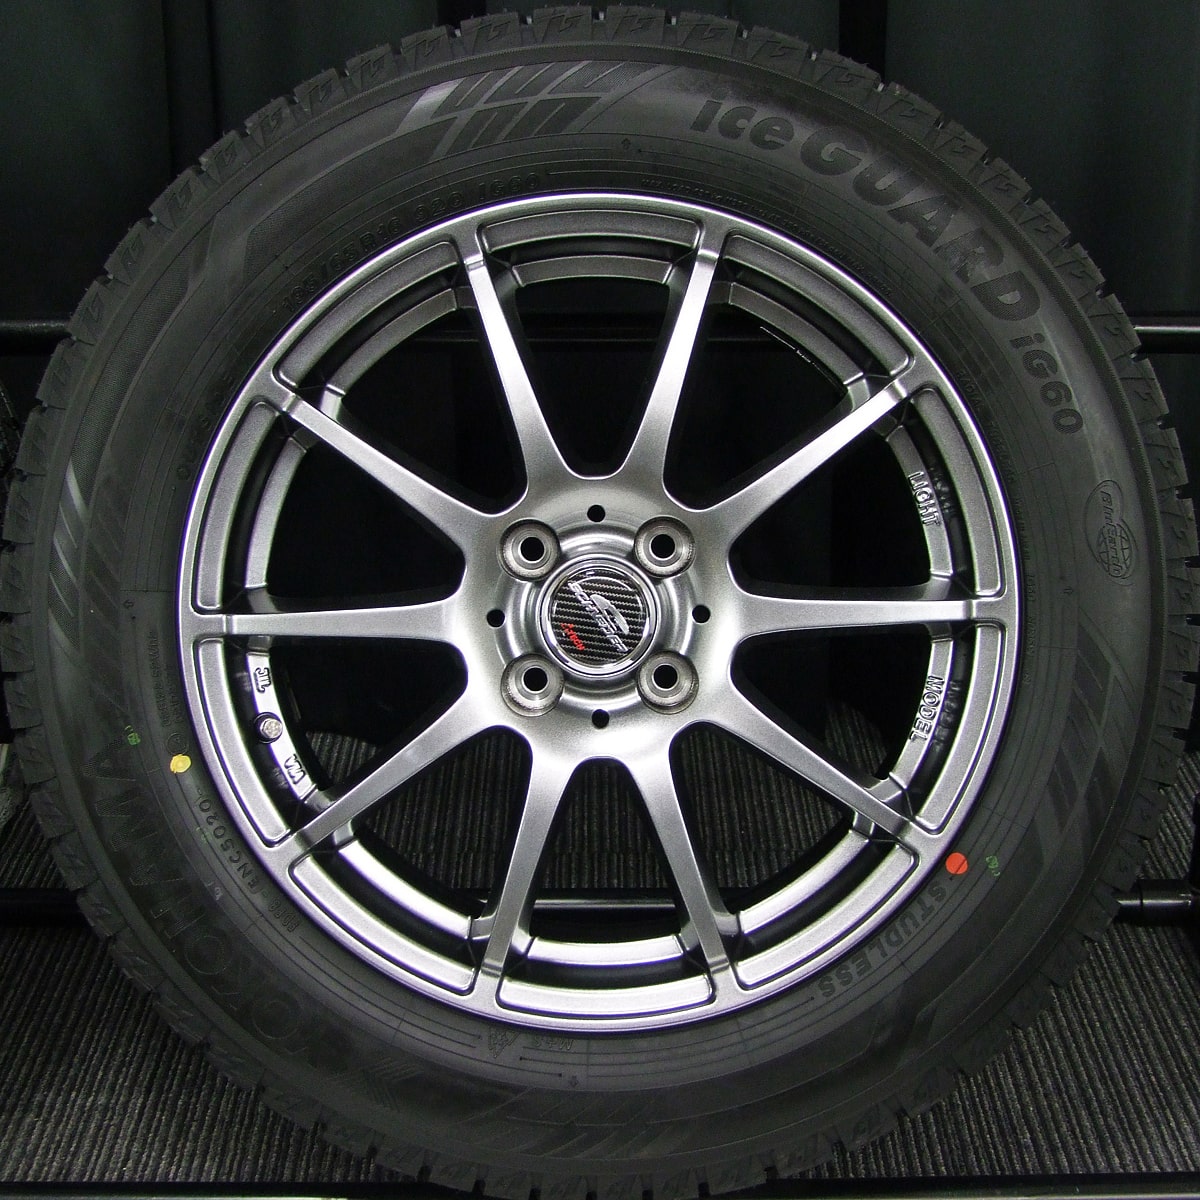 TOYO PROXES CF3 205/55R16 SCHNEIDER Stag メタリックグレー 16インチ 6.5J+48 5H-100 4本セット